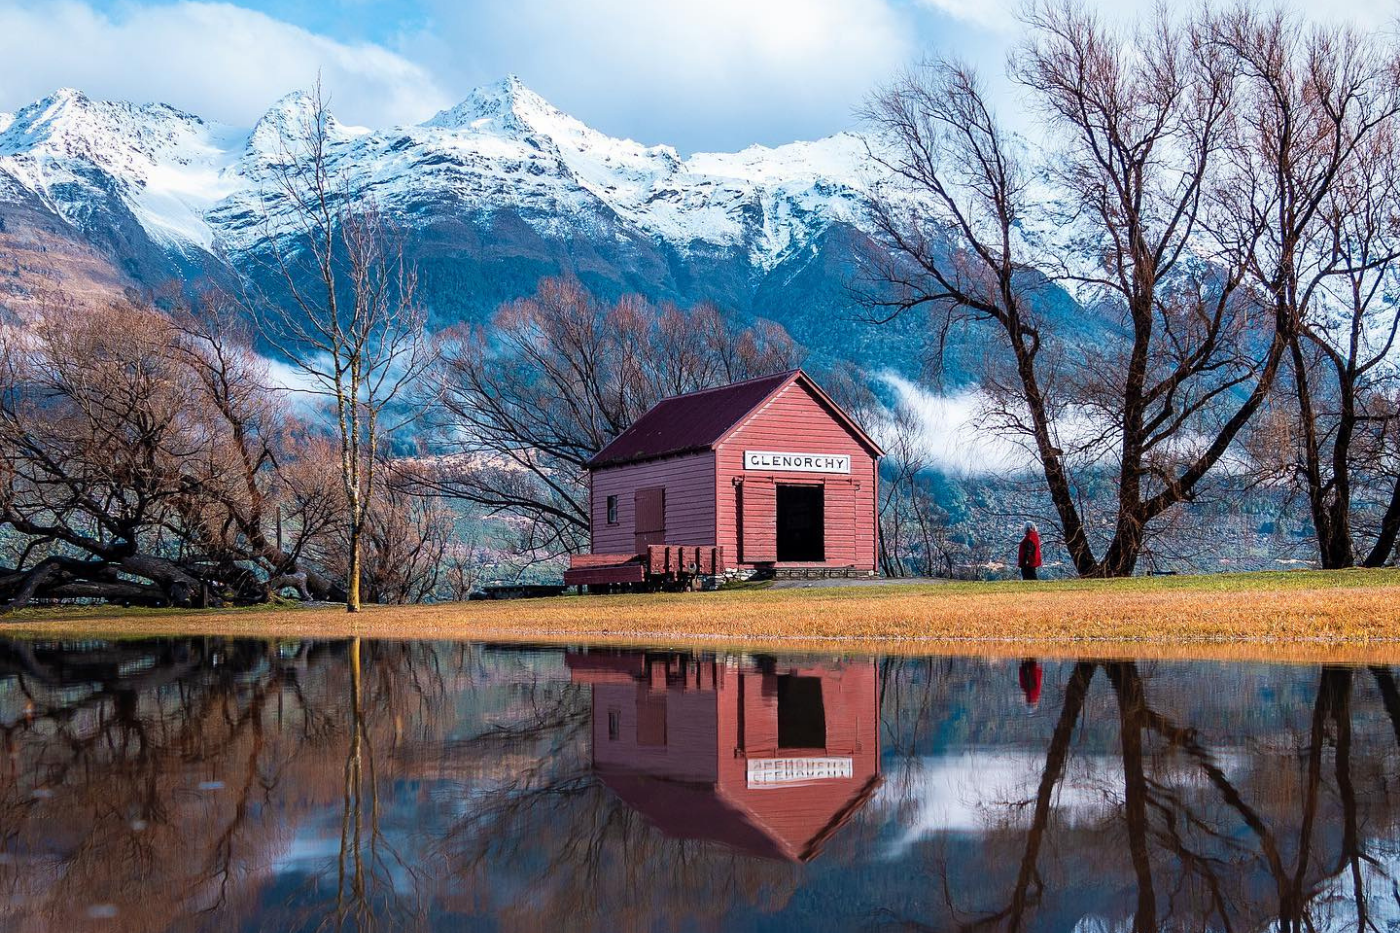 Red wharf shed and snowy mountains reflecting on the river